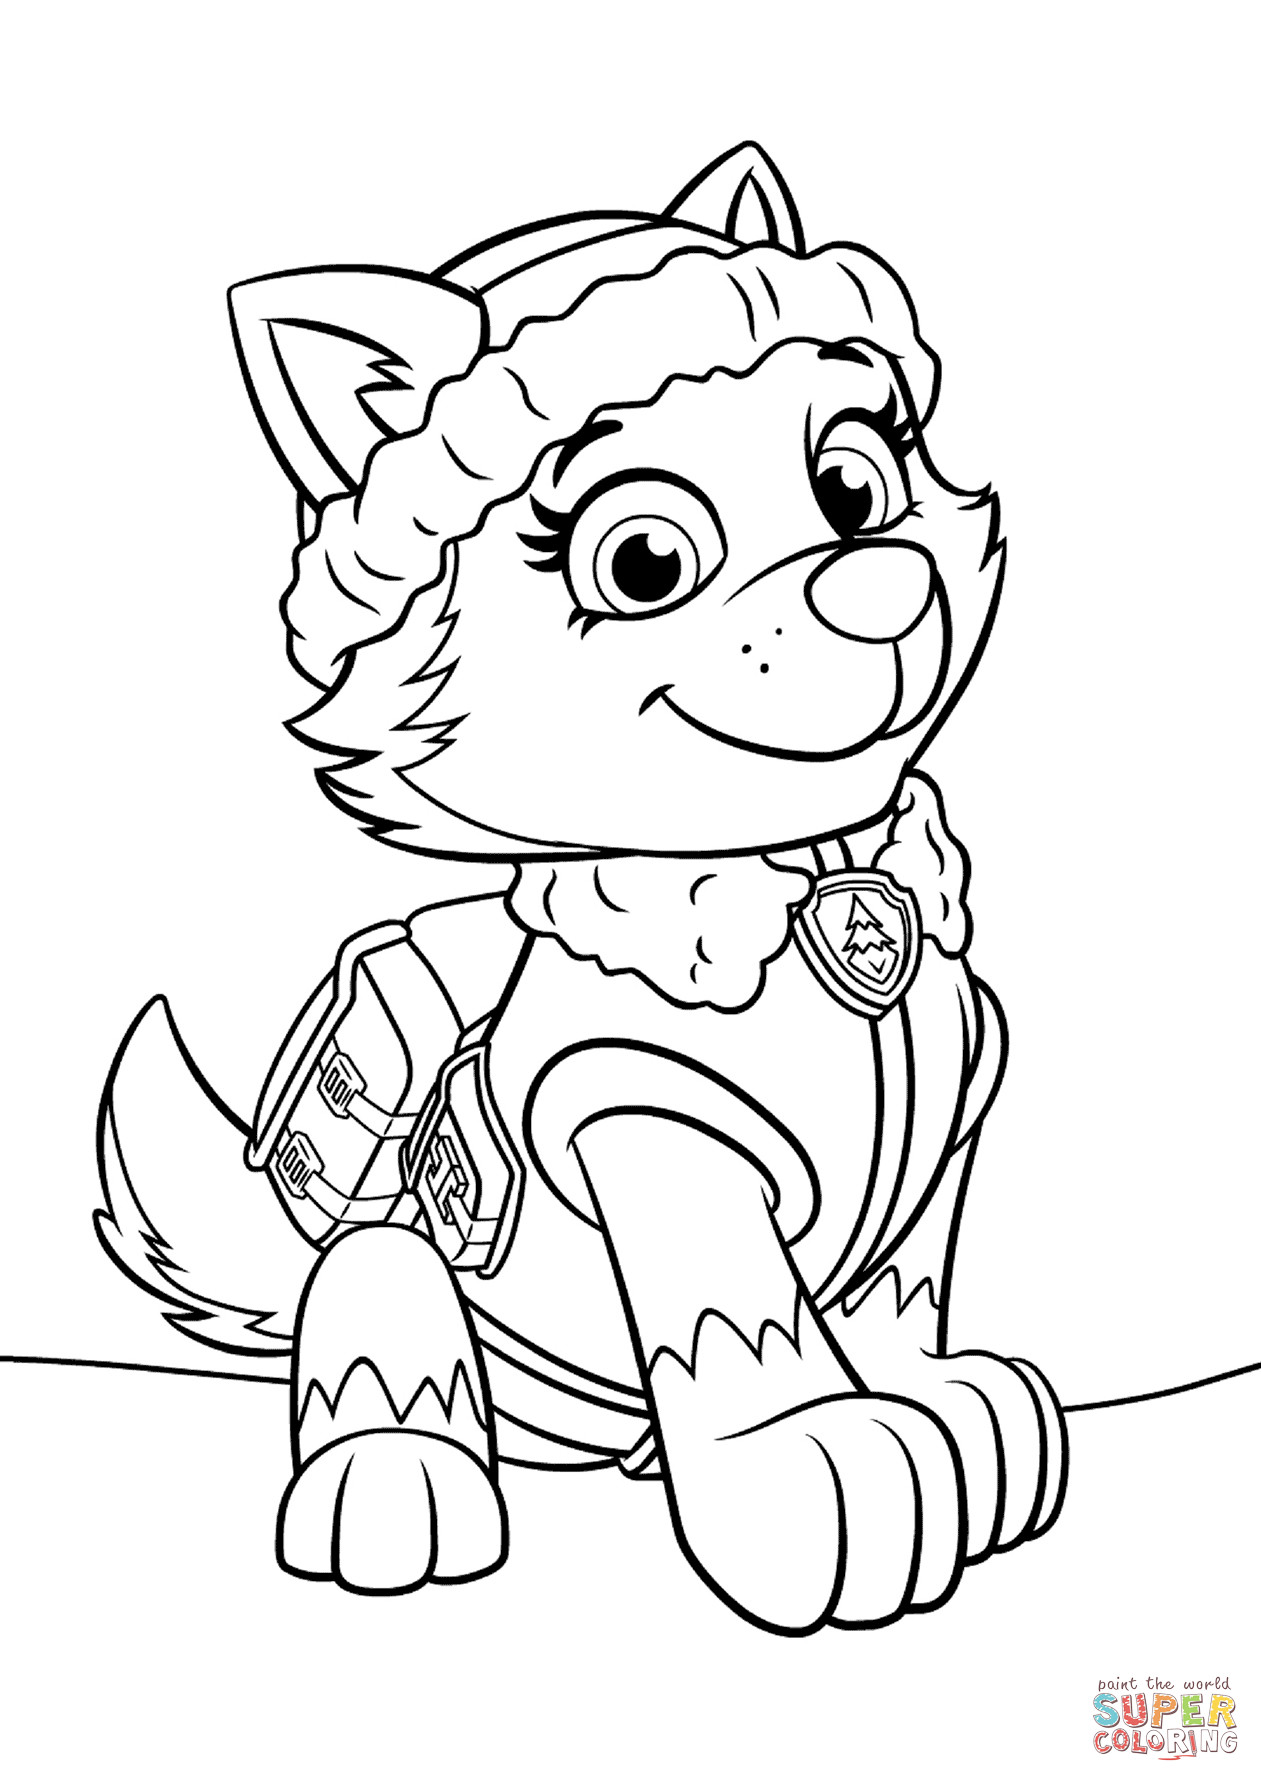 Paw Patrol Printable Coloring Pages
 Paw Patrol Everest coloring page